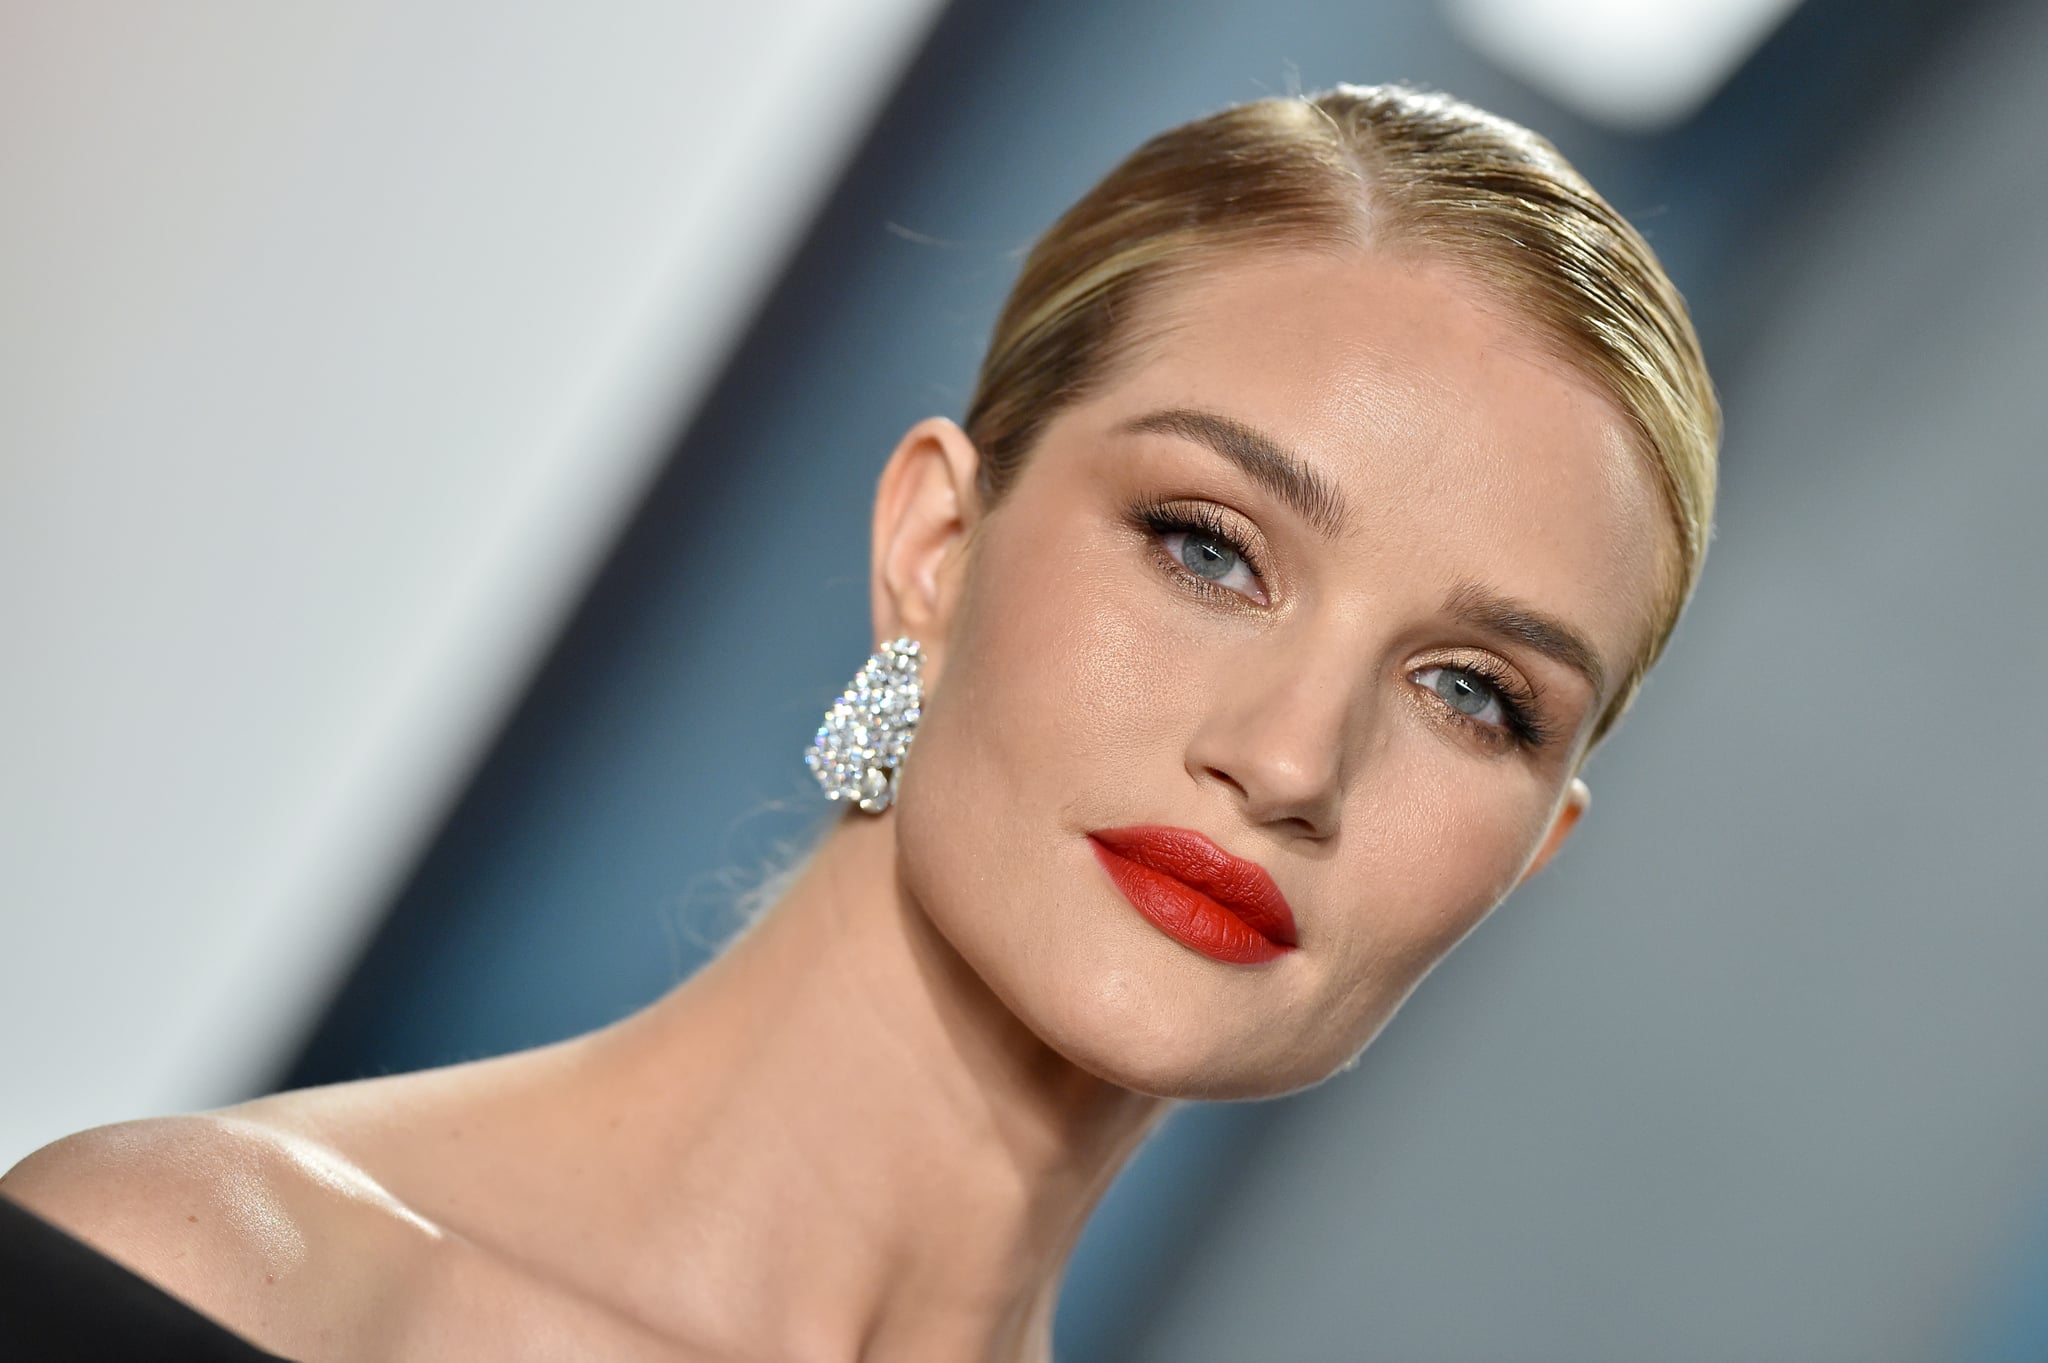 BEVERLY HILLS, CALIFORNIA - FEBRUARY 09: Rosie Huntington-Whiteley attends the 2020 Vanity Fair Oscar Party hosted by Radhika Jones at Wallis Annenberg Centre for the Performing Arts on February 09, 2020 in Beverly Hills, California. (Photo by Axelle/Bauer-Griffin/FilmMagic)